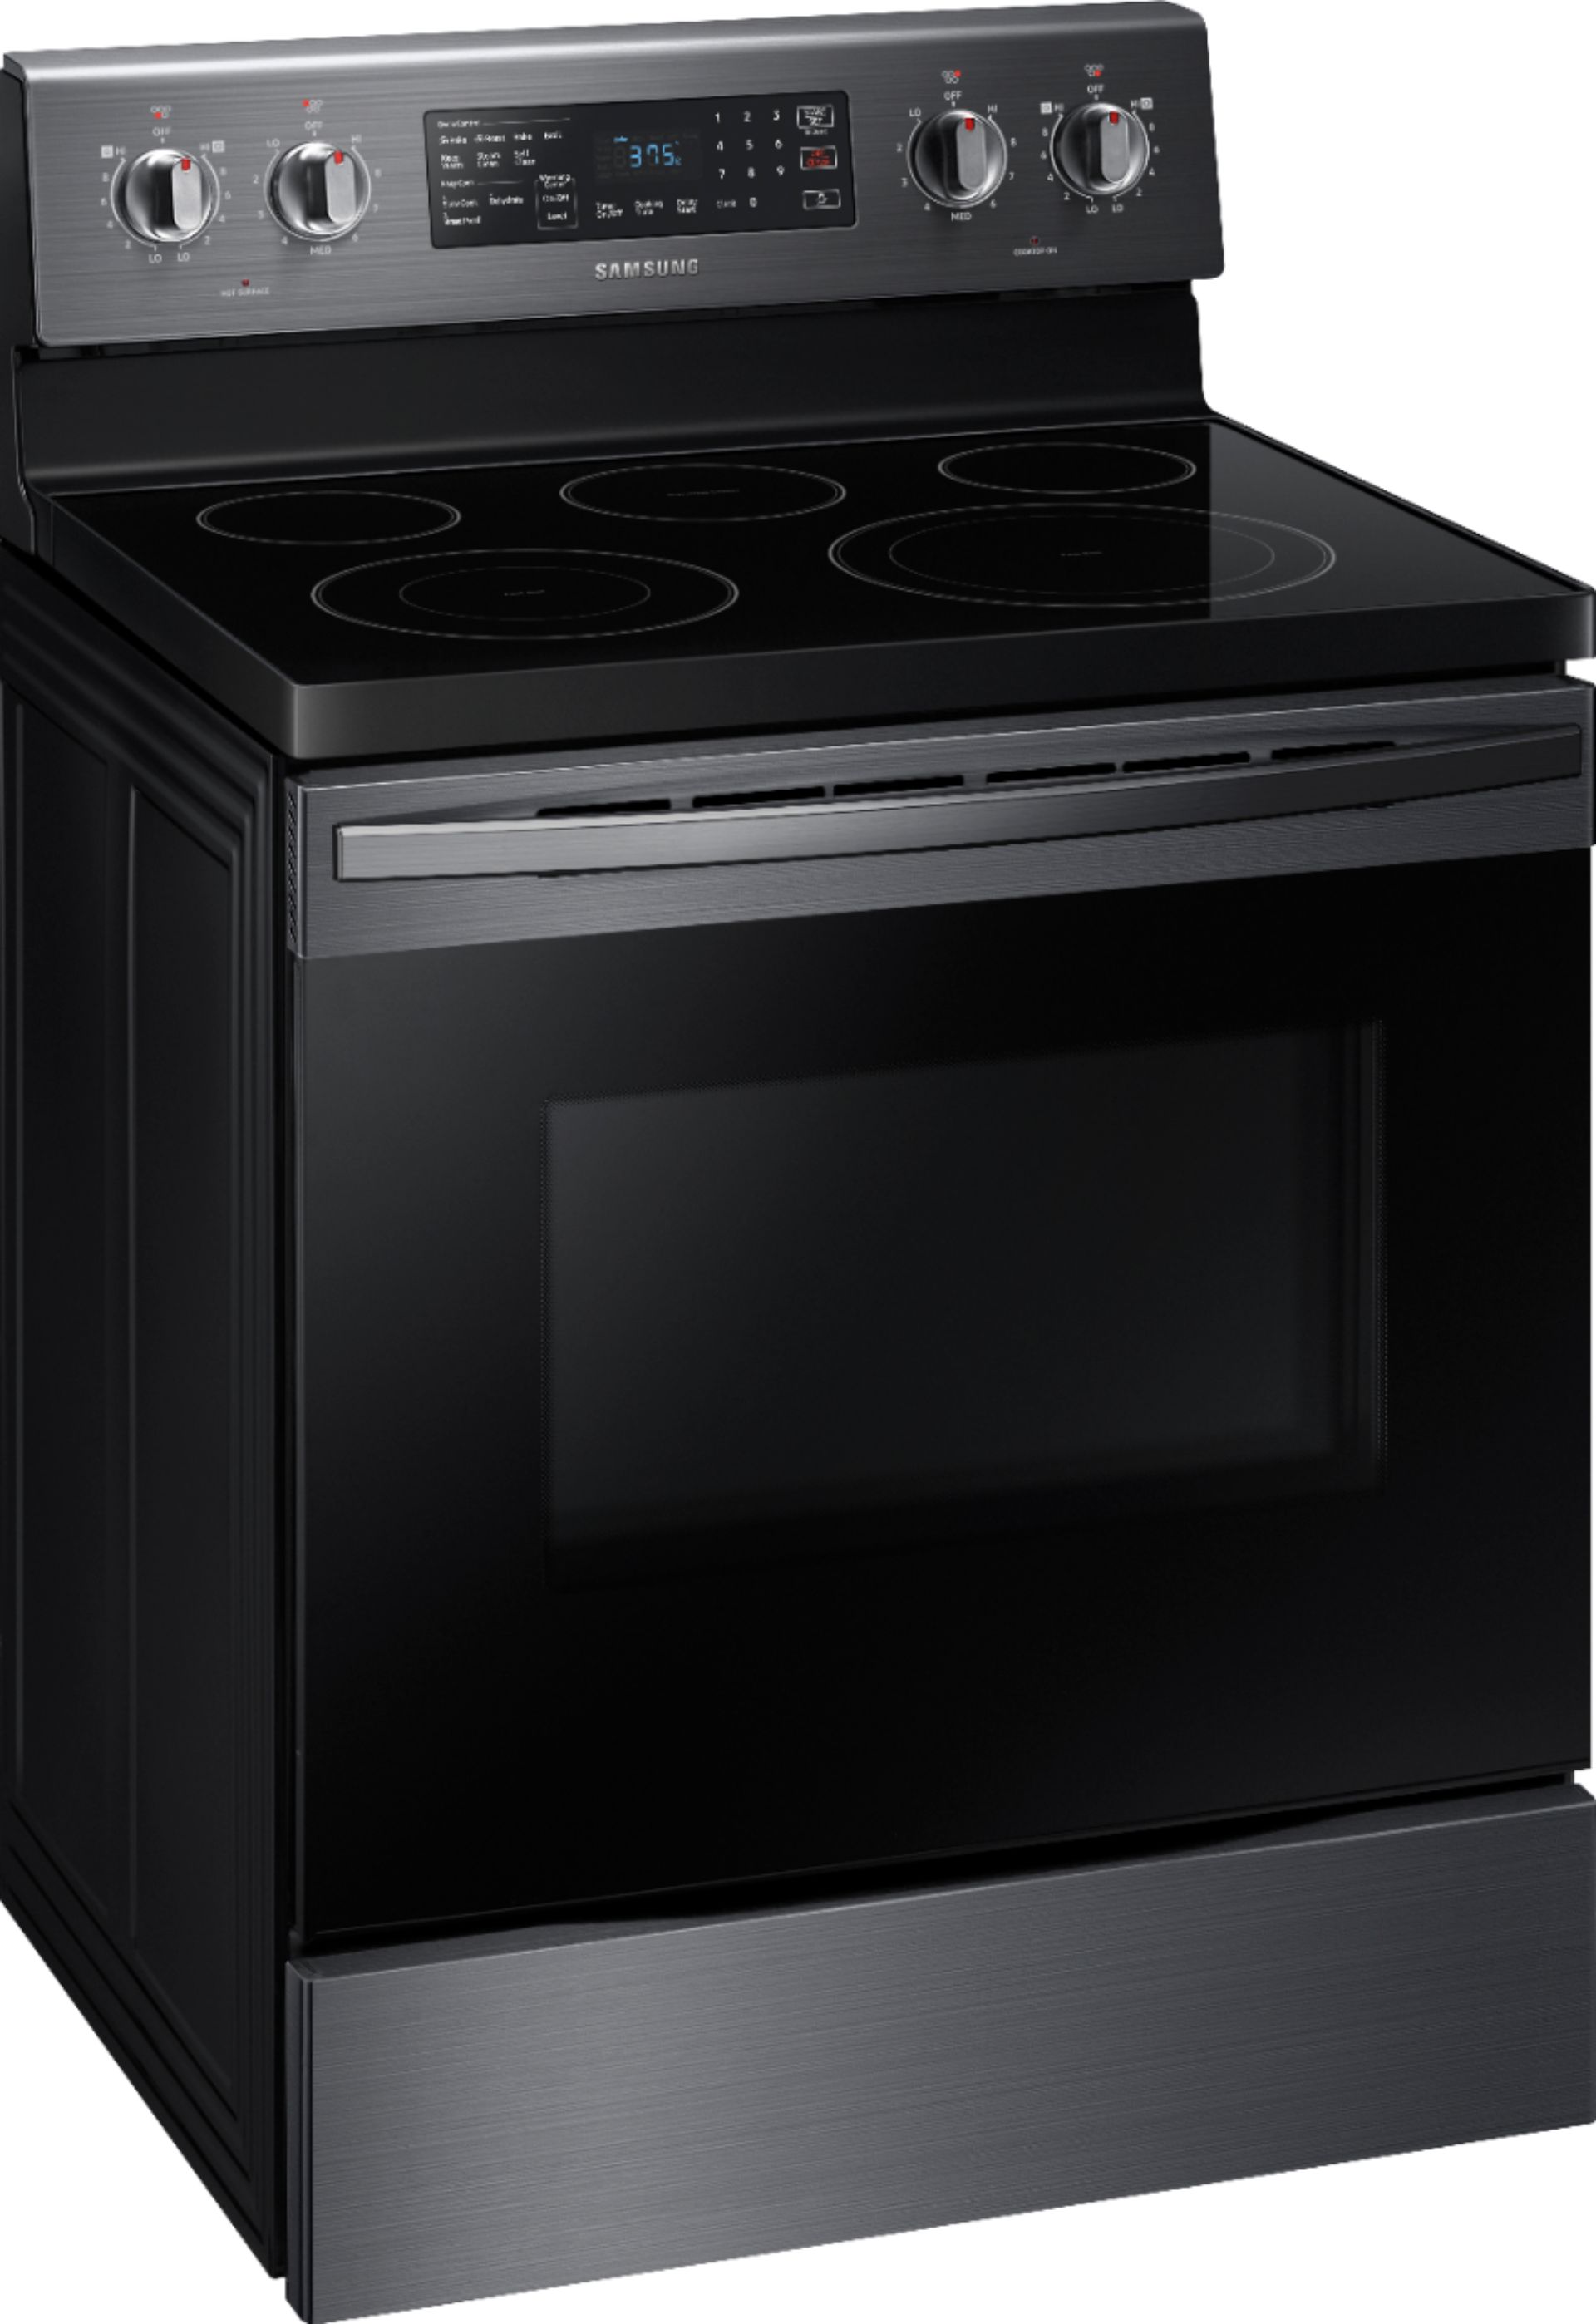 Angle View: Samsung - 5.9 Cu. Ft. Freestanding Electric Convection Range with Self-Steam Cleaning - Black stainless steel